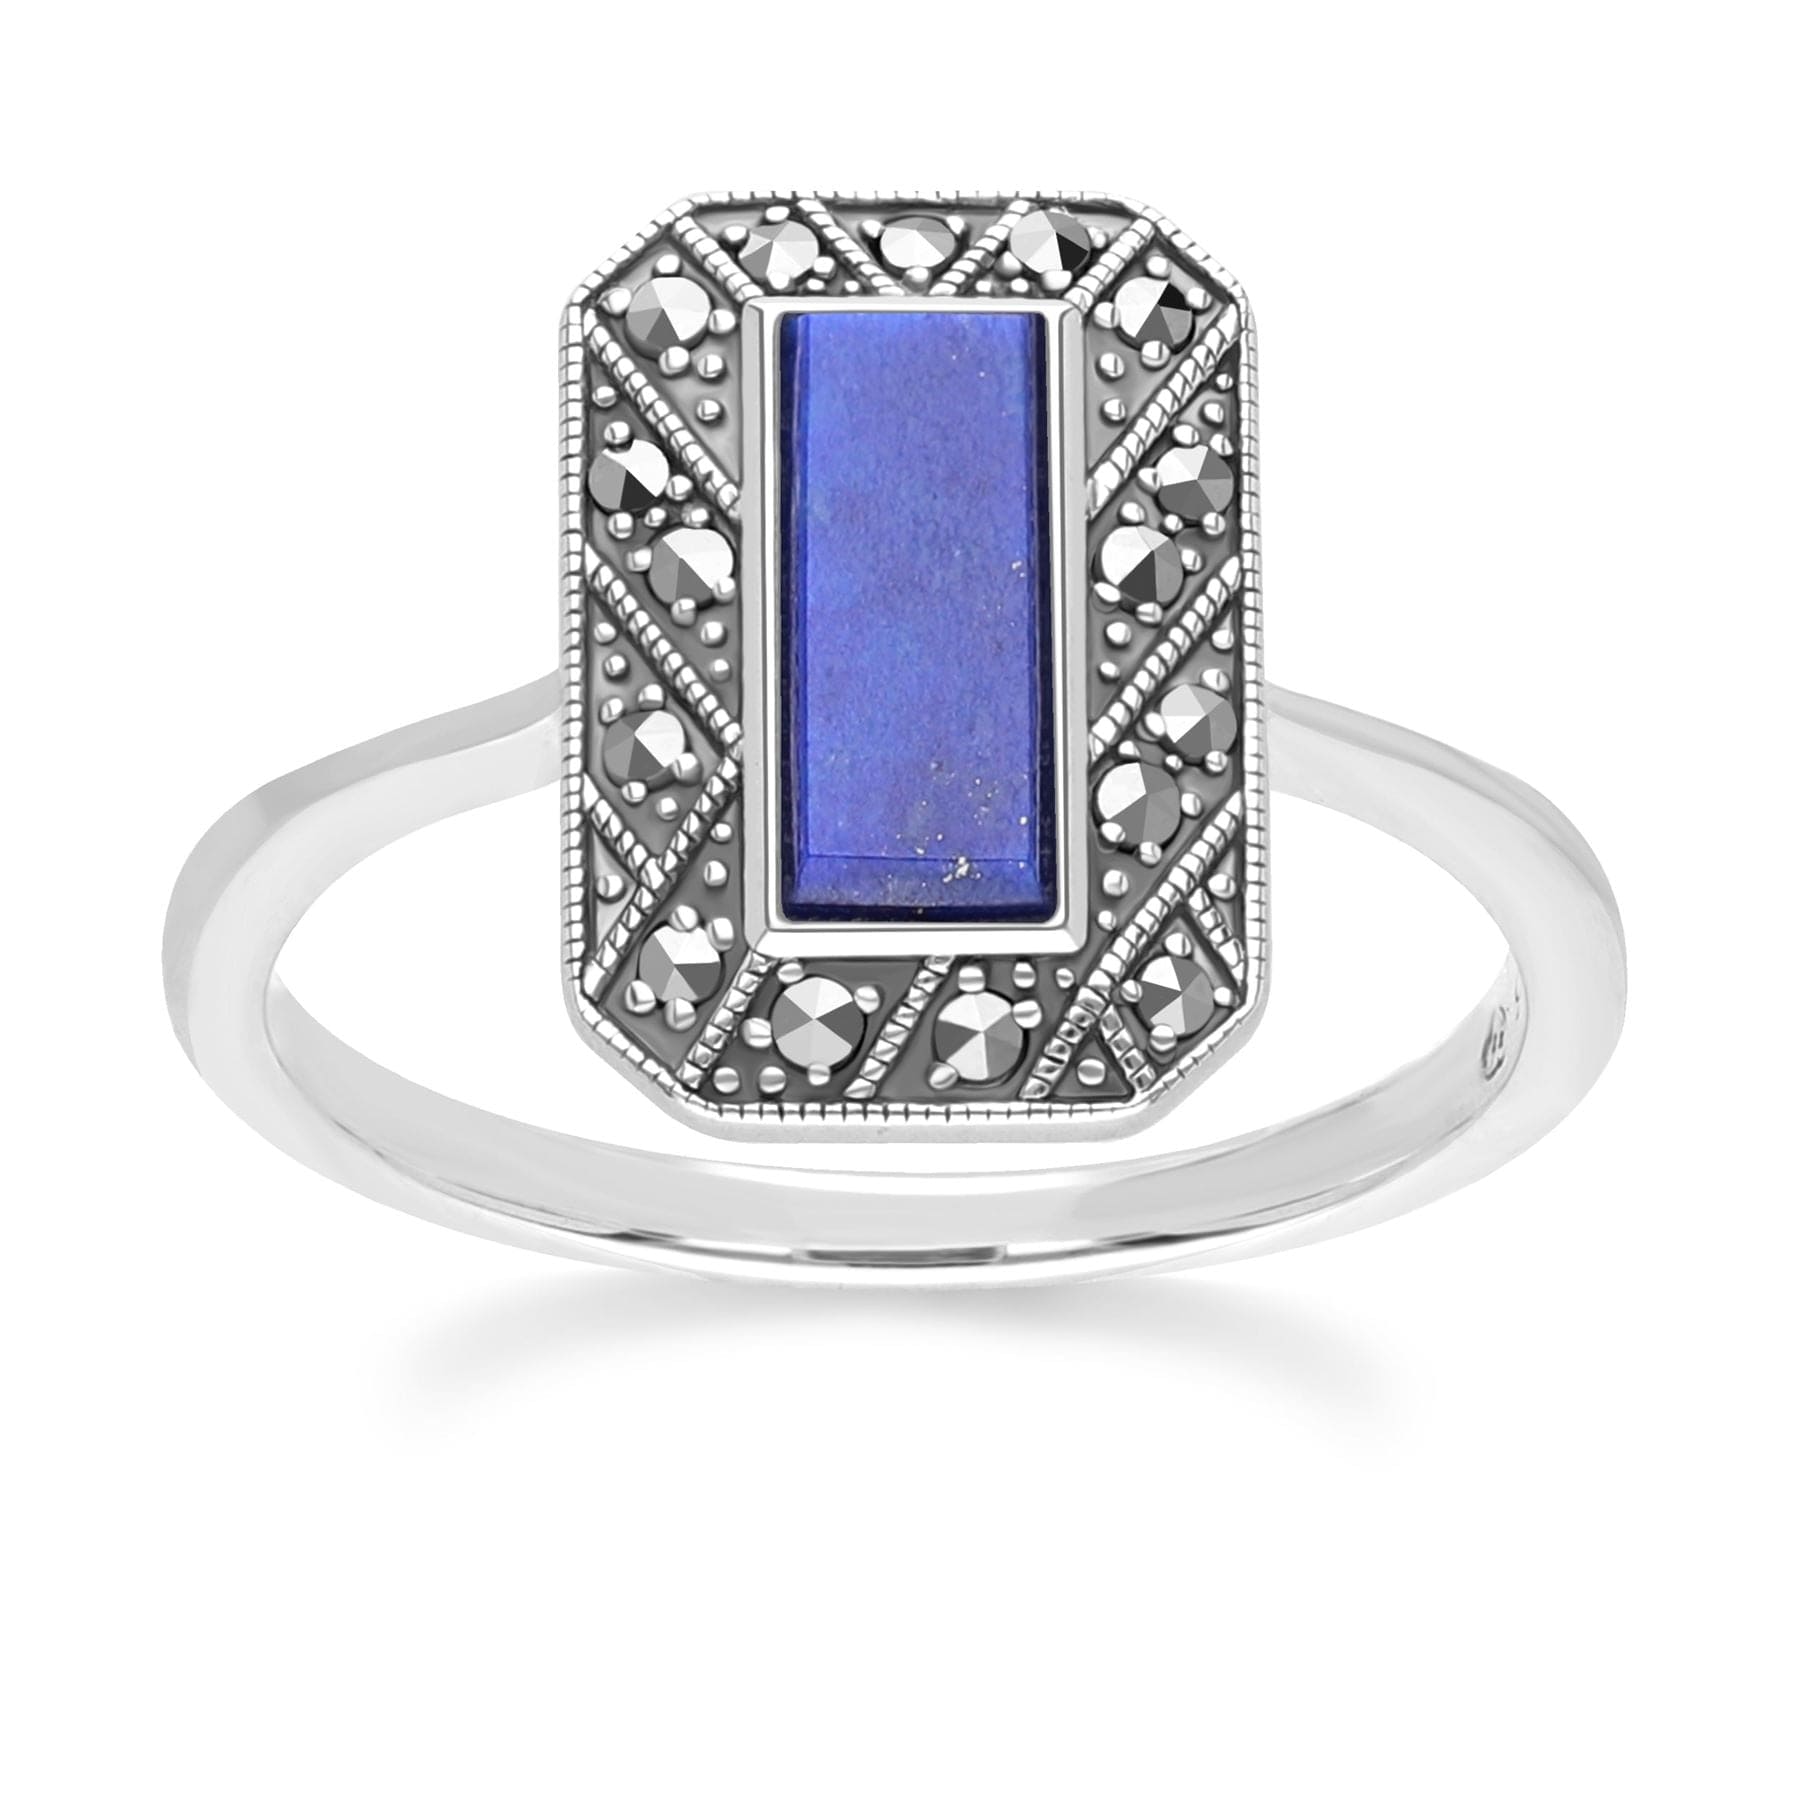 Art Deco Style Rectangle Lapis Lazuli and Marcasite Ring in Sterling Silver 214R641903925 